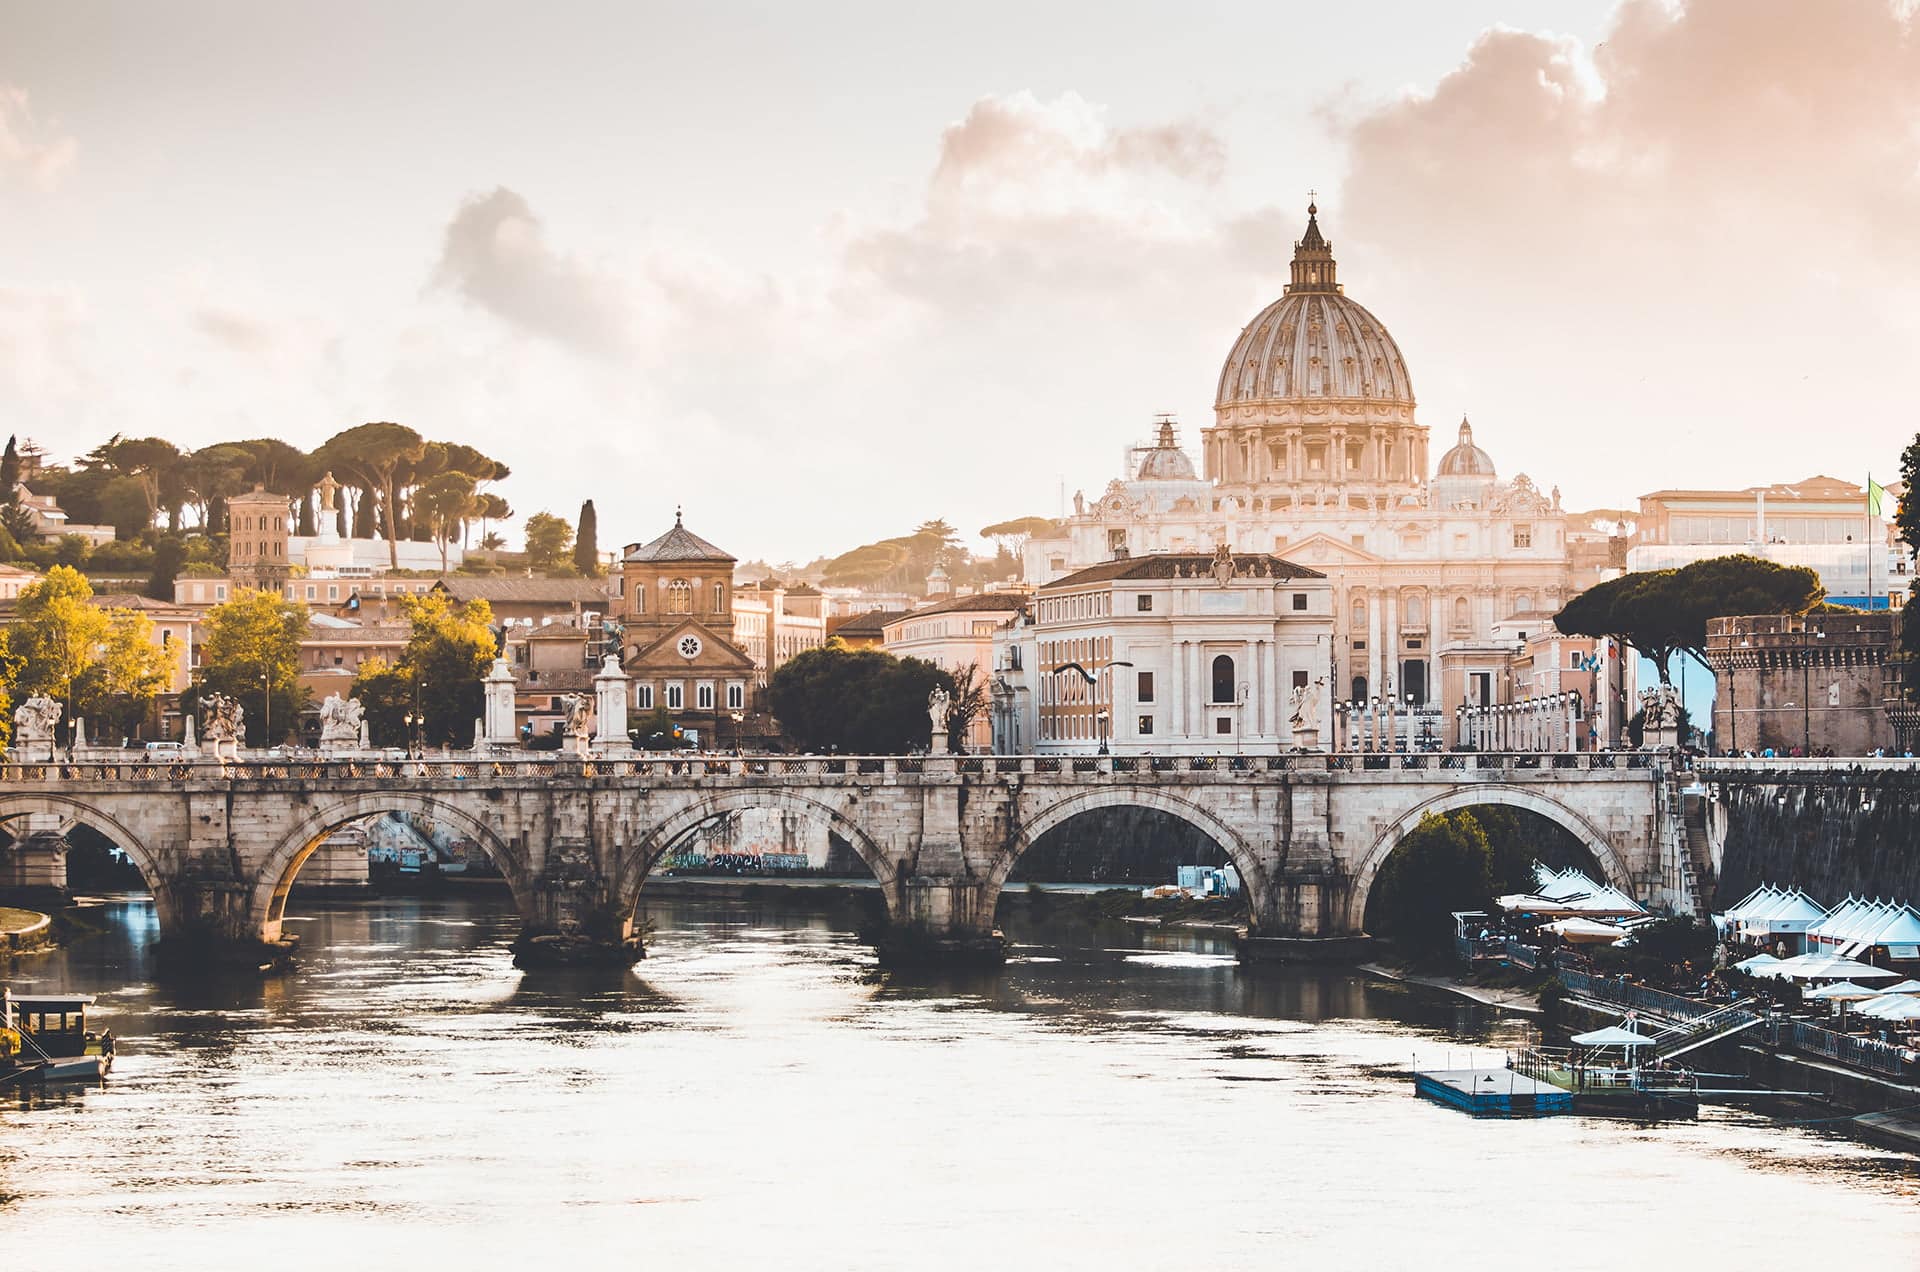 view of the Vatican and bridge in Rome